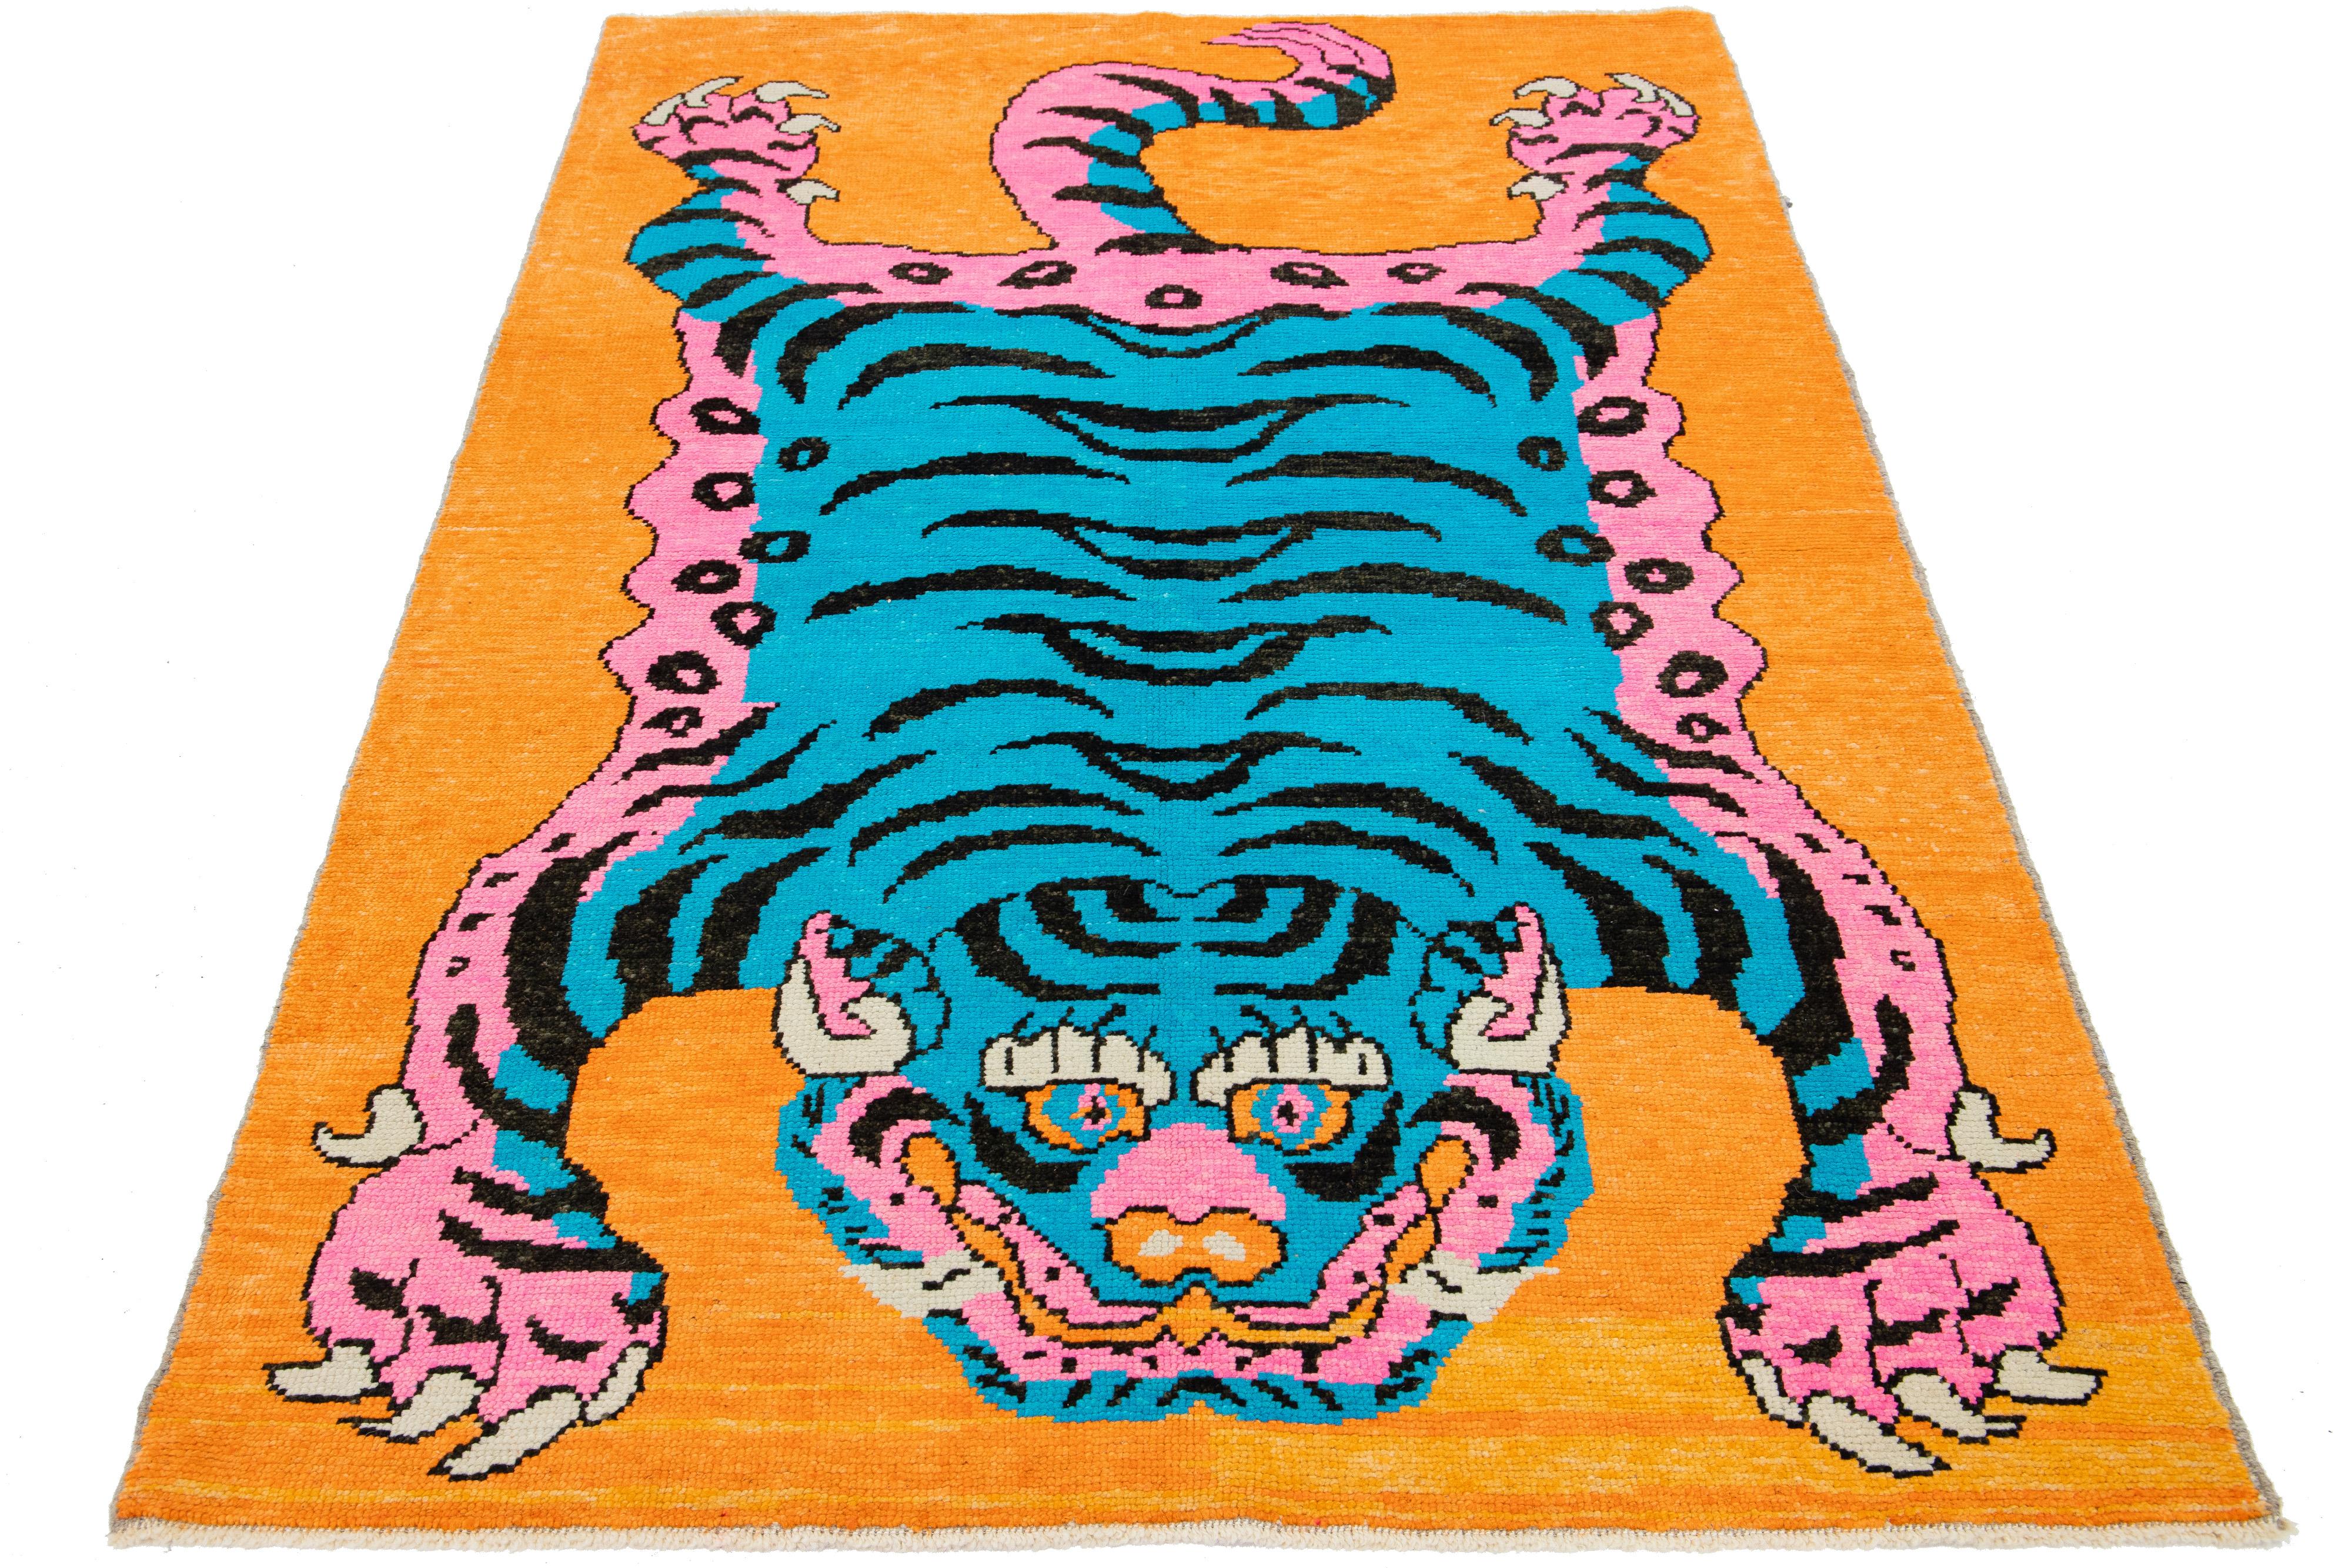 This is a beautiful handmade Turkish Art Deco wool rug with an orange field and blue, pink, and purple accent colors in a gorgeous tiger pictorial design. 

This rug measures 5'4